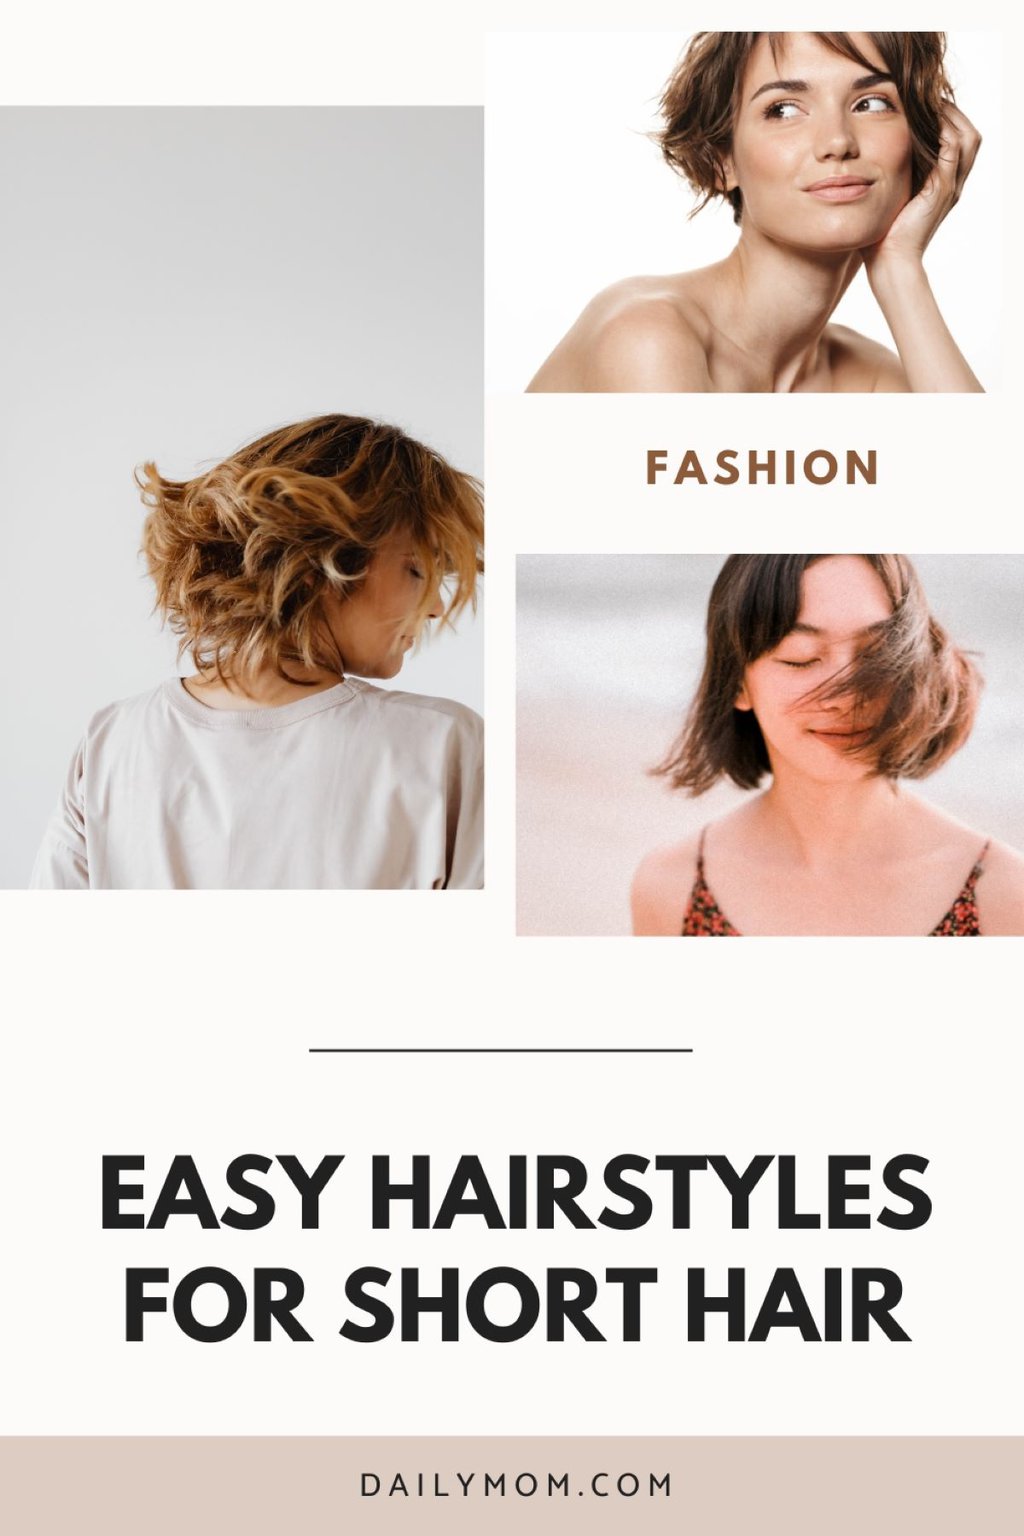 Easy Hairstyles For Short Hair: 3 Essential Looks In Five Minutes Or Less